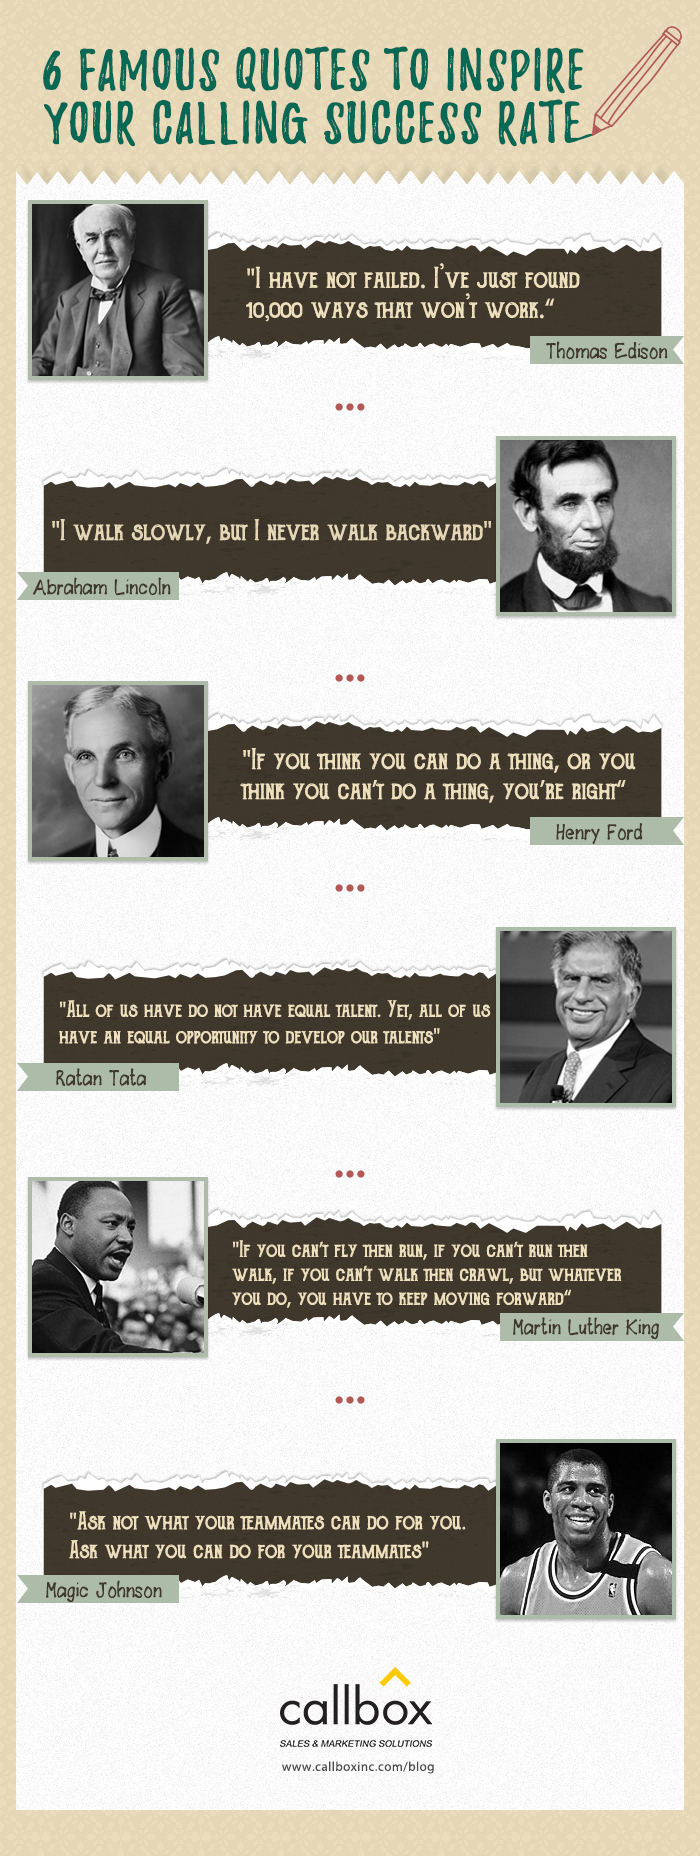 Callbox blog image for 6 Famous Quotes to Inspire your Calling Success Rate in Appointment Setting